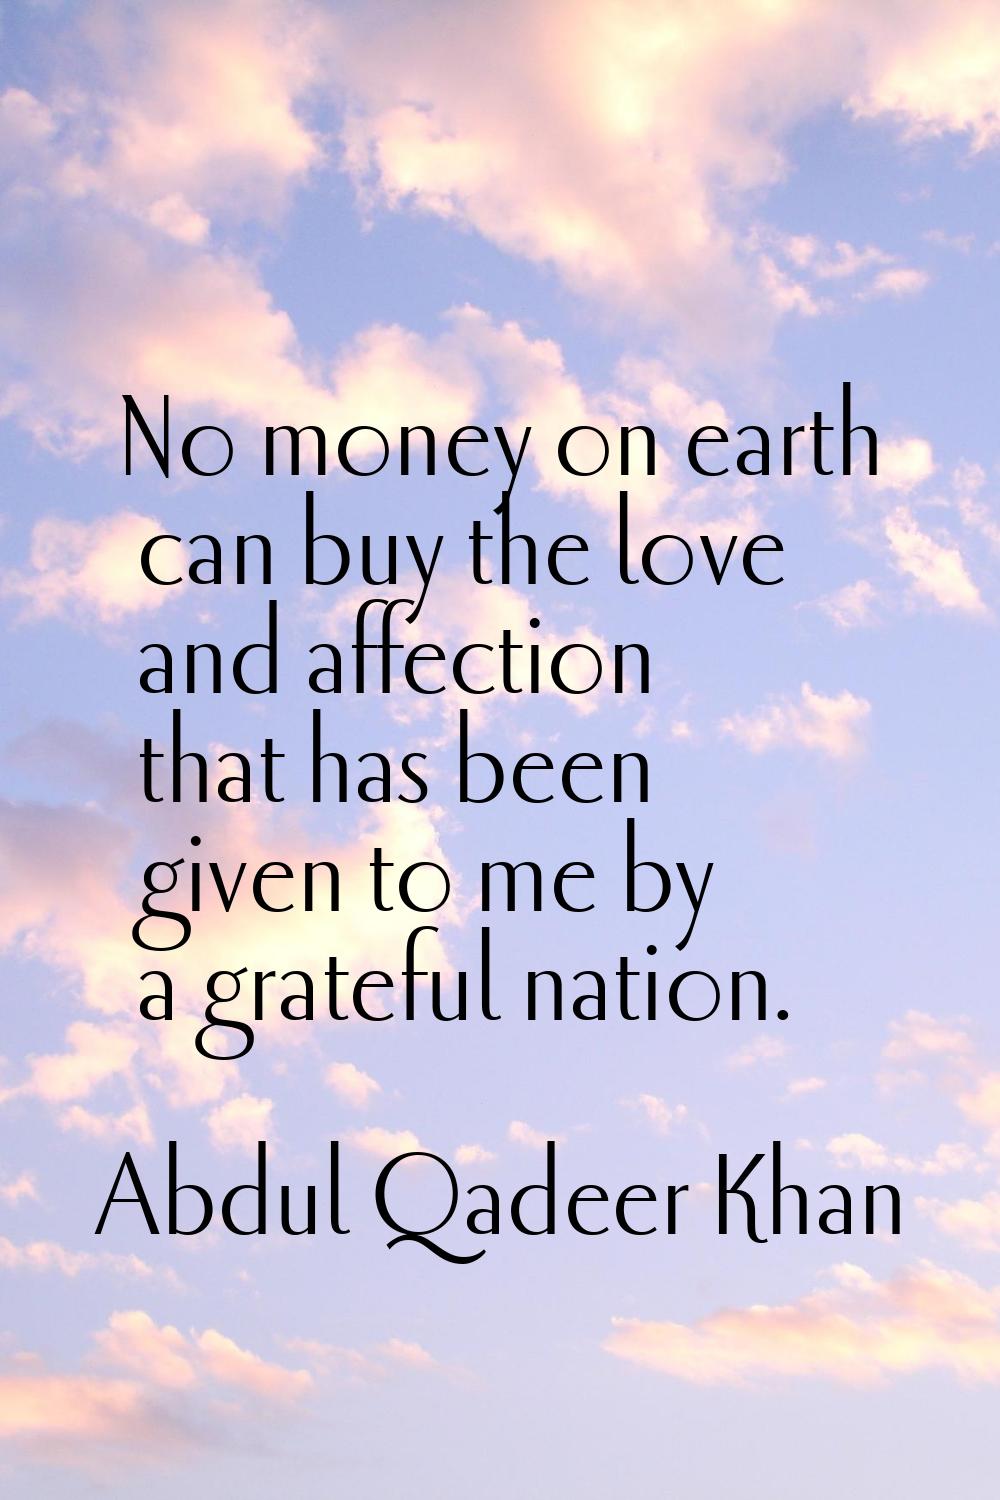 No money on earth can buy the love and affection that has been given to me by a grateful nation.